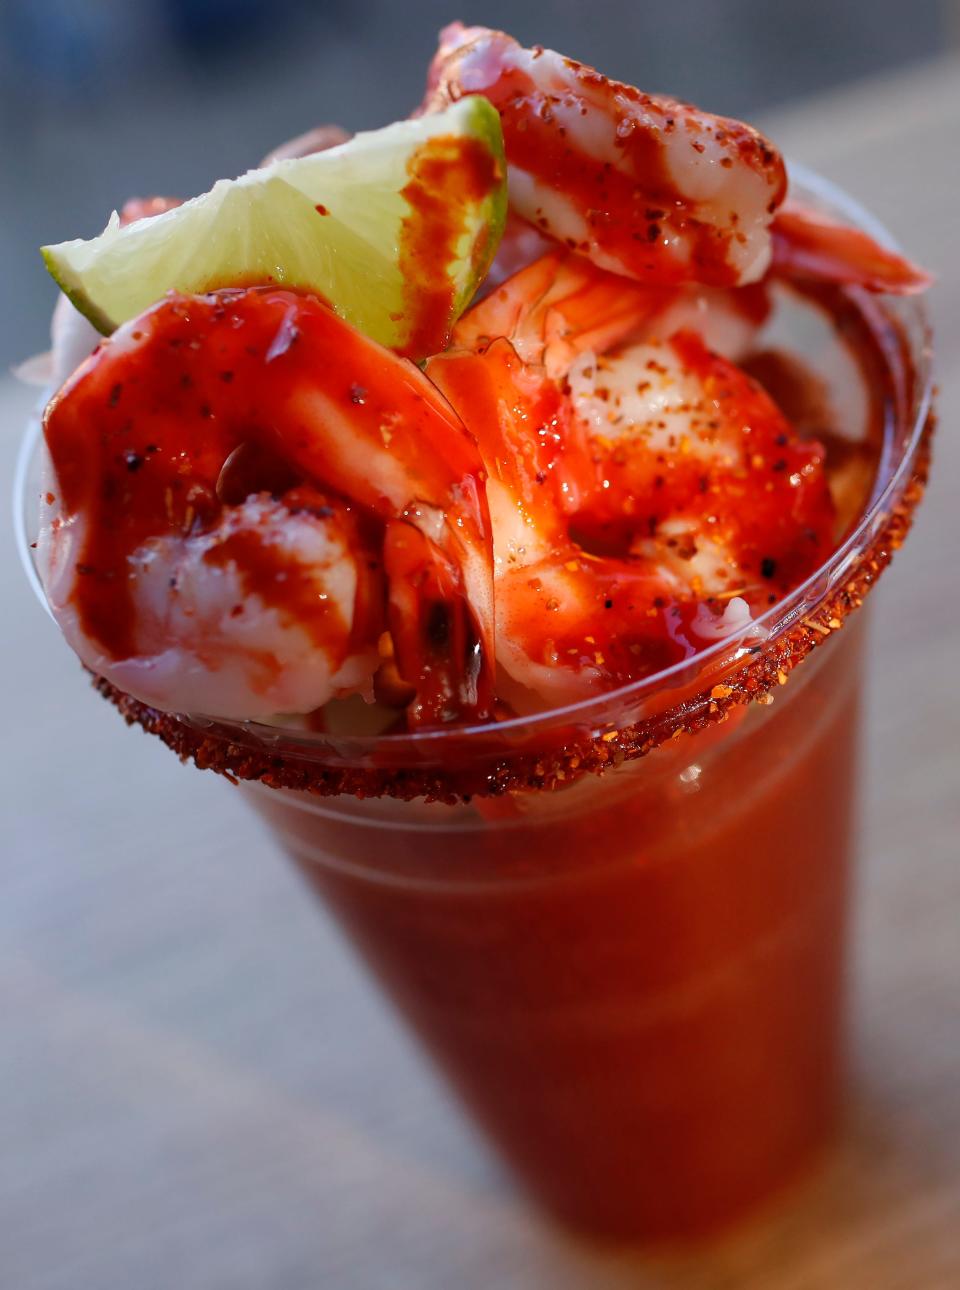 A Michelada Preparada topped with cucumber slices and shrimp and served with peanuts, salsa and tajin at Poquitos located in the former Go Bar on Prince Avenue.